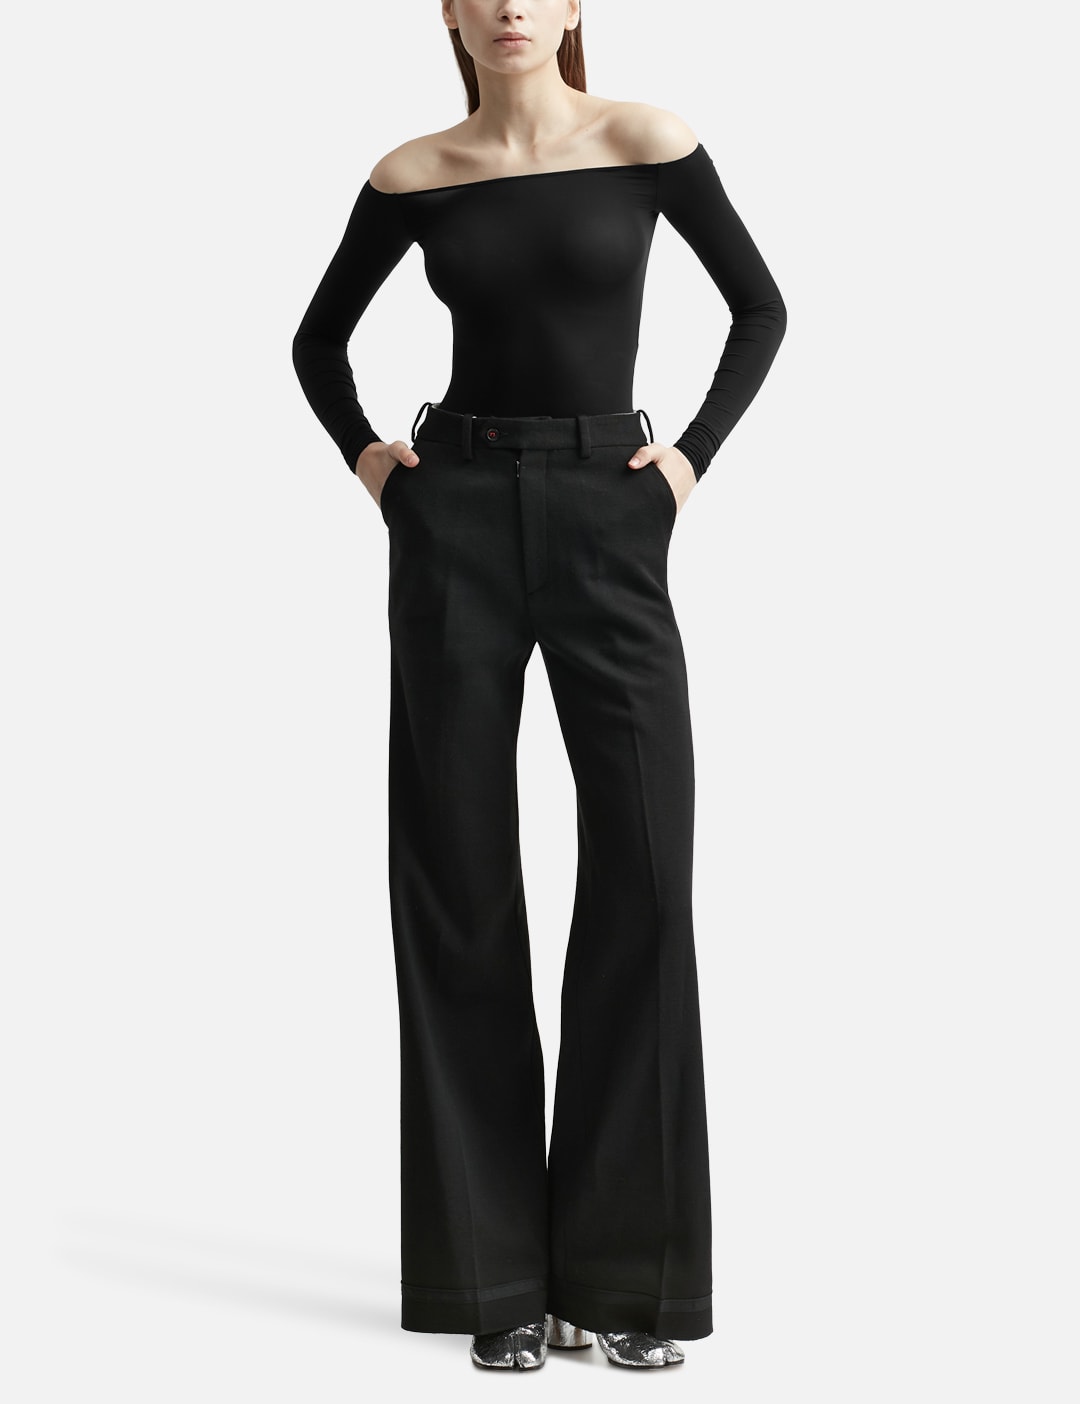 MUGLER - Zipped Jersey Bodysuit  HBX - Globally Curated Fashion and  Lifestyle by Hypebeast